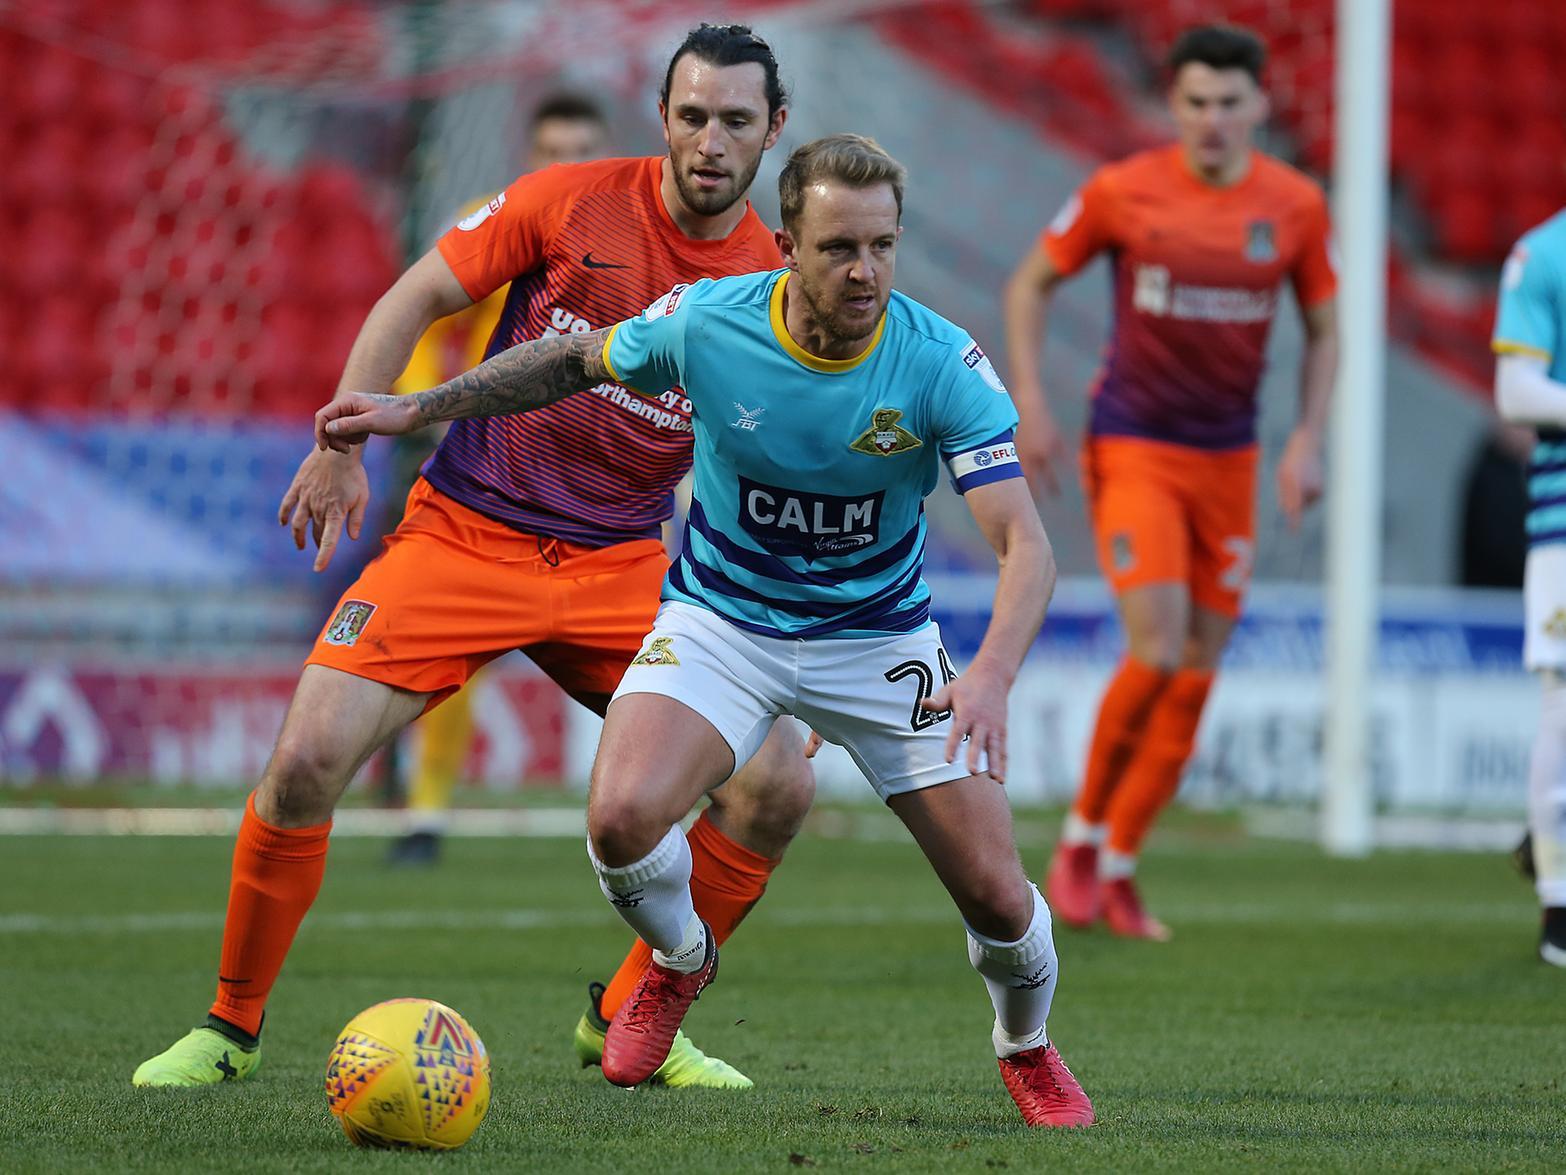 38-year-old James Coppinger wants to sign a new contract at Doncaster Rovers but admits he may be at the back of the queue. (Doncaster Free Press)